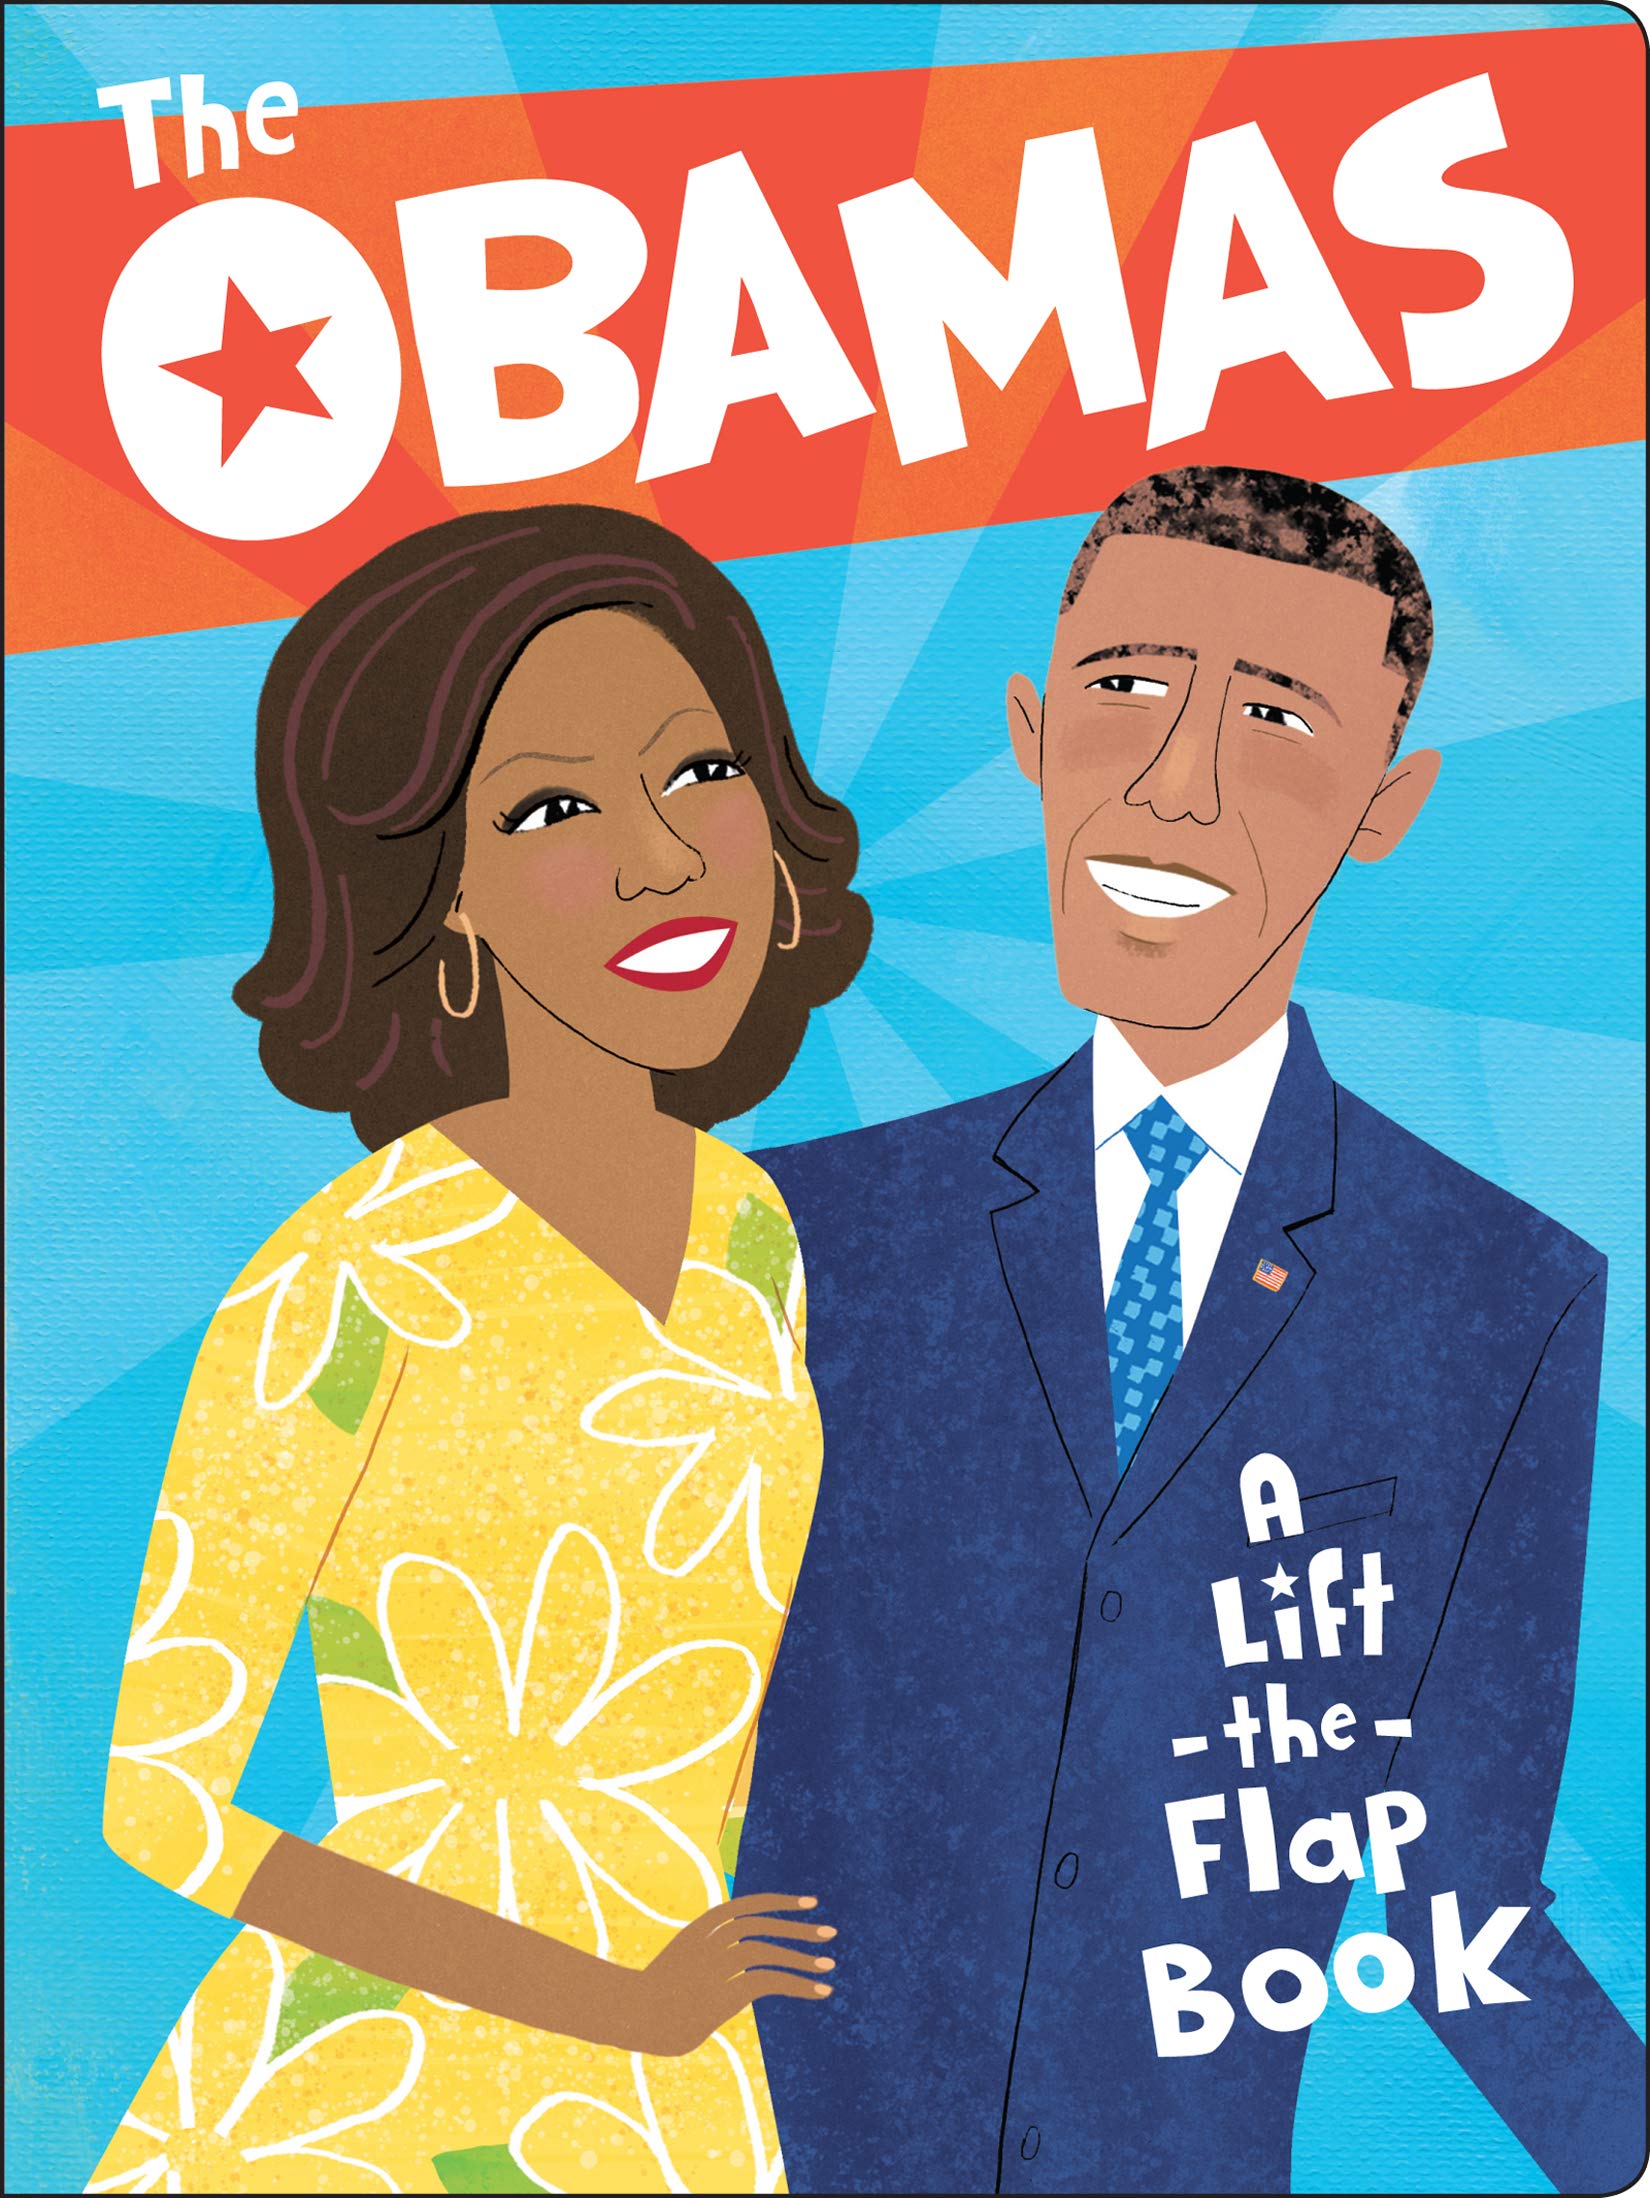 The Obamas: A great book for summer reading